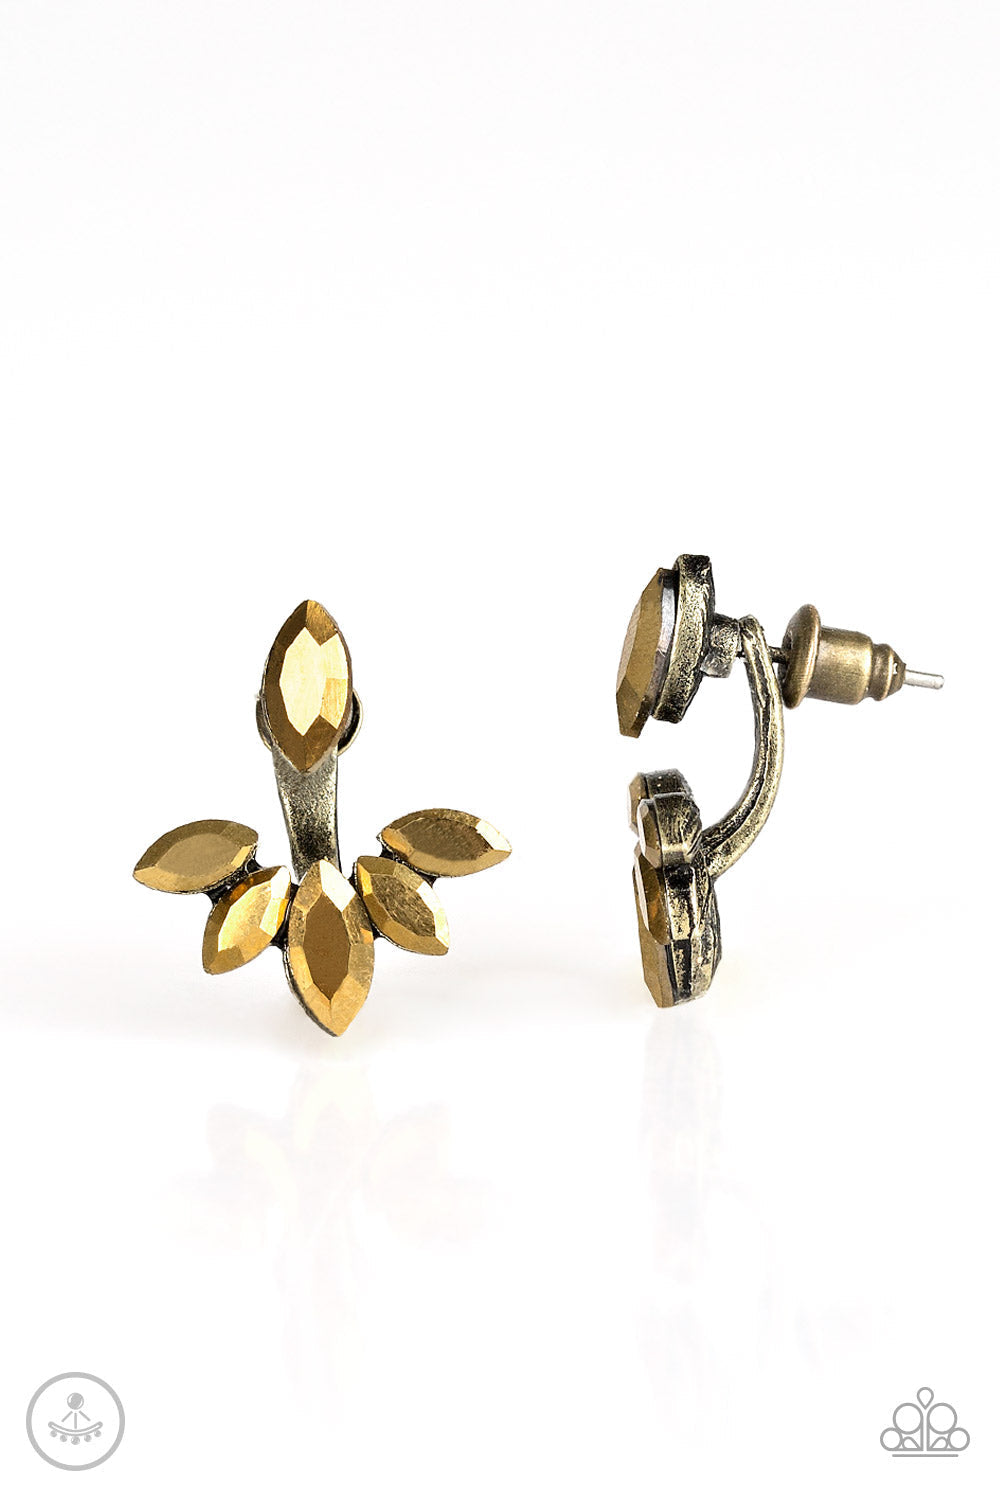 Radical Refinement - Brass Double Sided Post Earrings - Paparazzi Accessories - A solitaire aurum marquise cut rhinestone attaches to a double-sided post, designed to fasten behind the ear. Encrusted in matching aurum rhinestones, a double-sided post peeks out beneath the ear, creating a glittery fringe. Earring attaches to a standard post fitting.